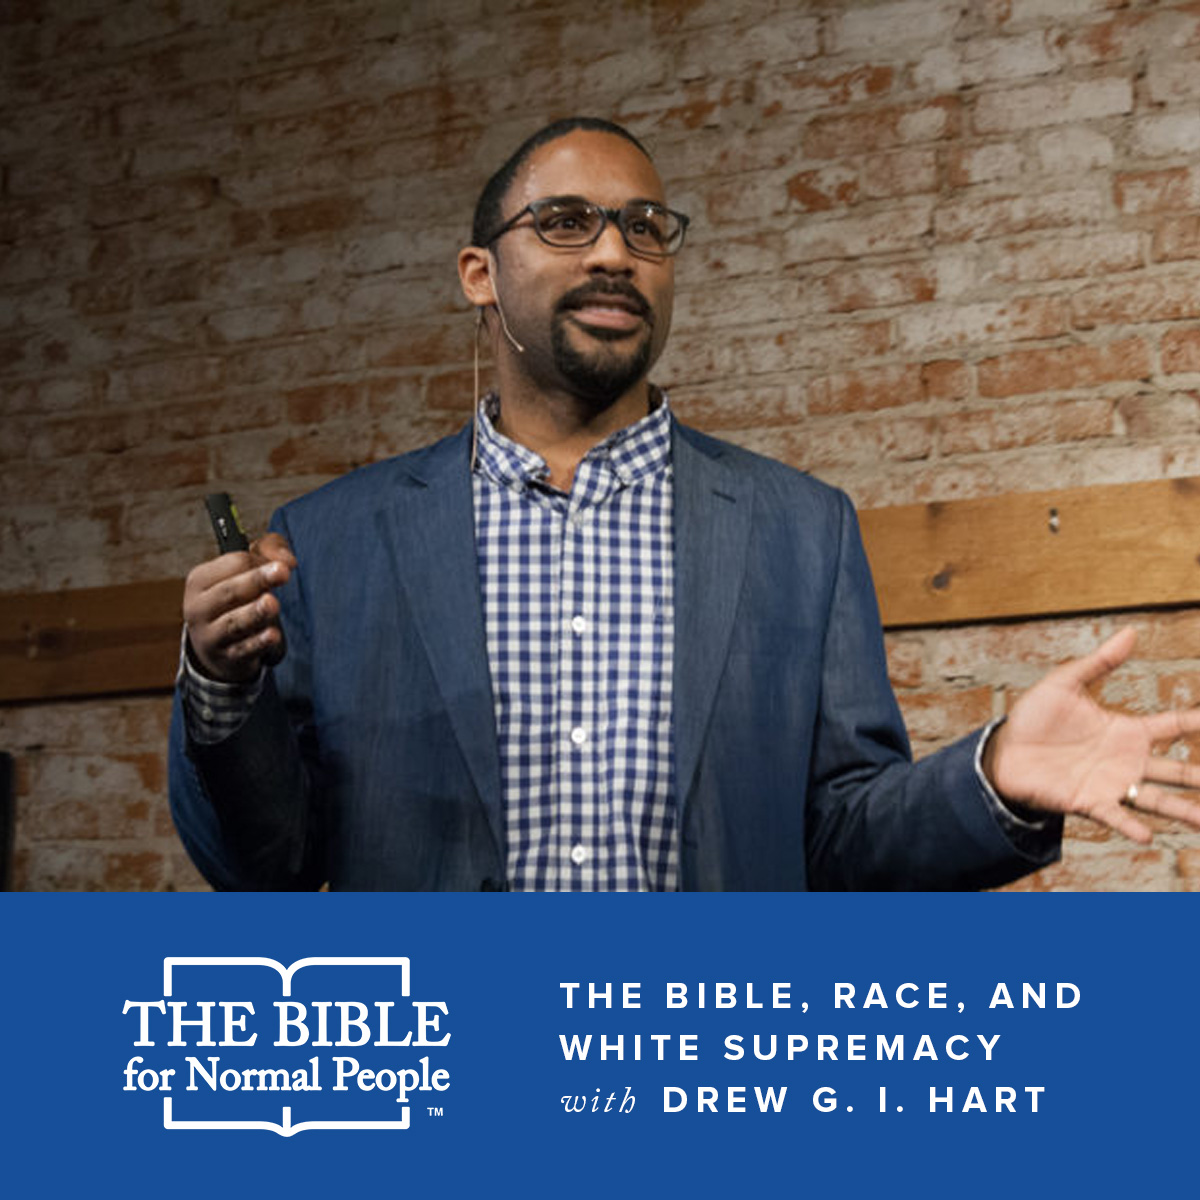 Interview with with Drew G. I. Hart: The Bible, Race, and White Supremacy